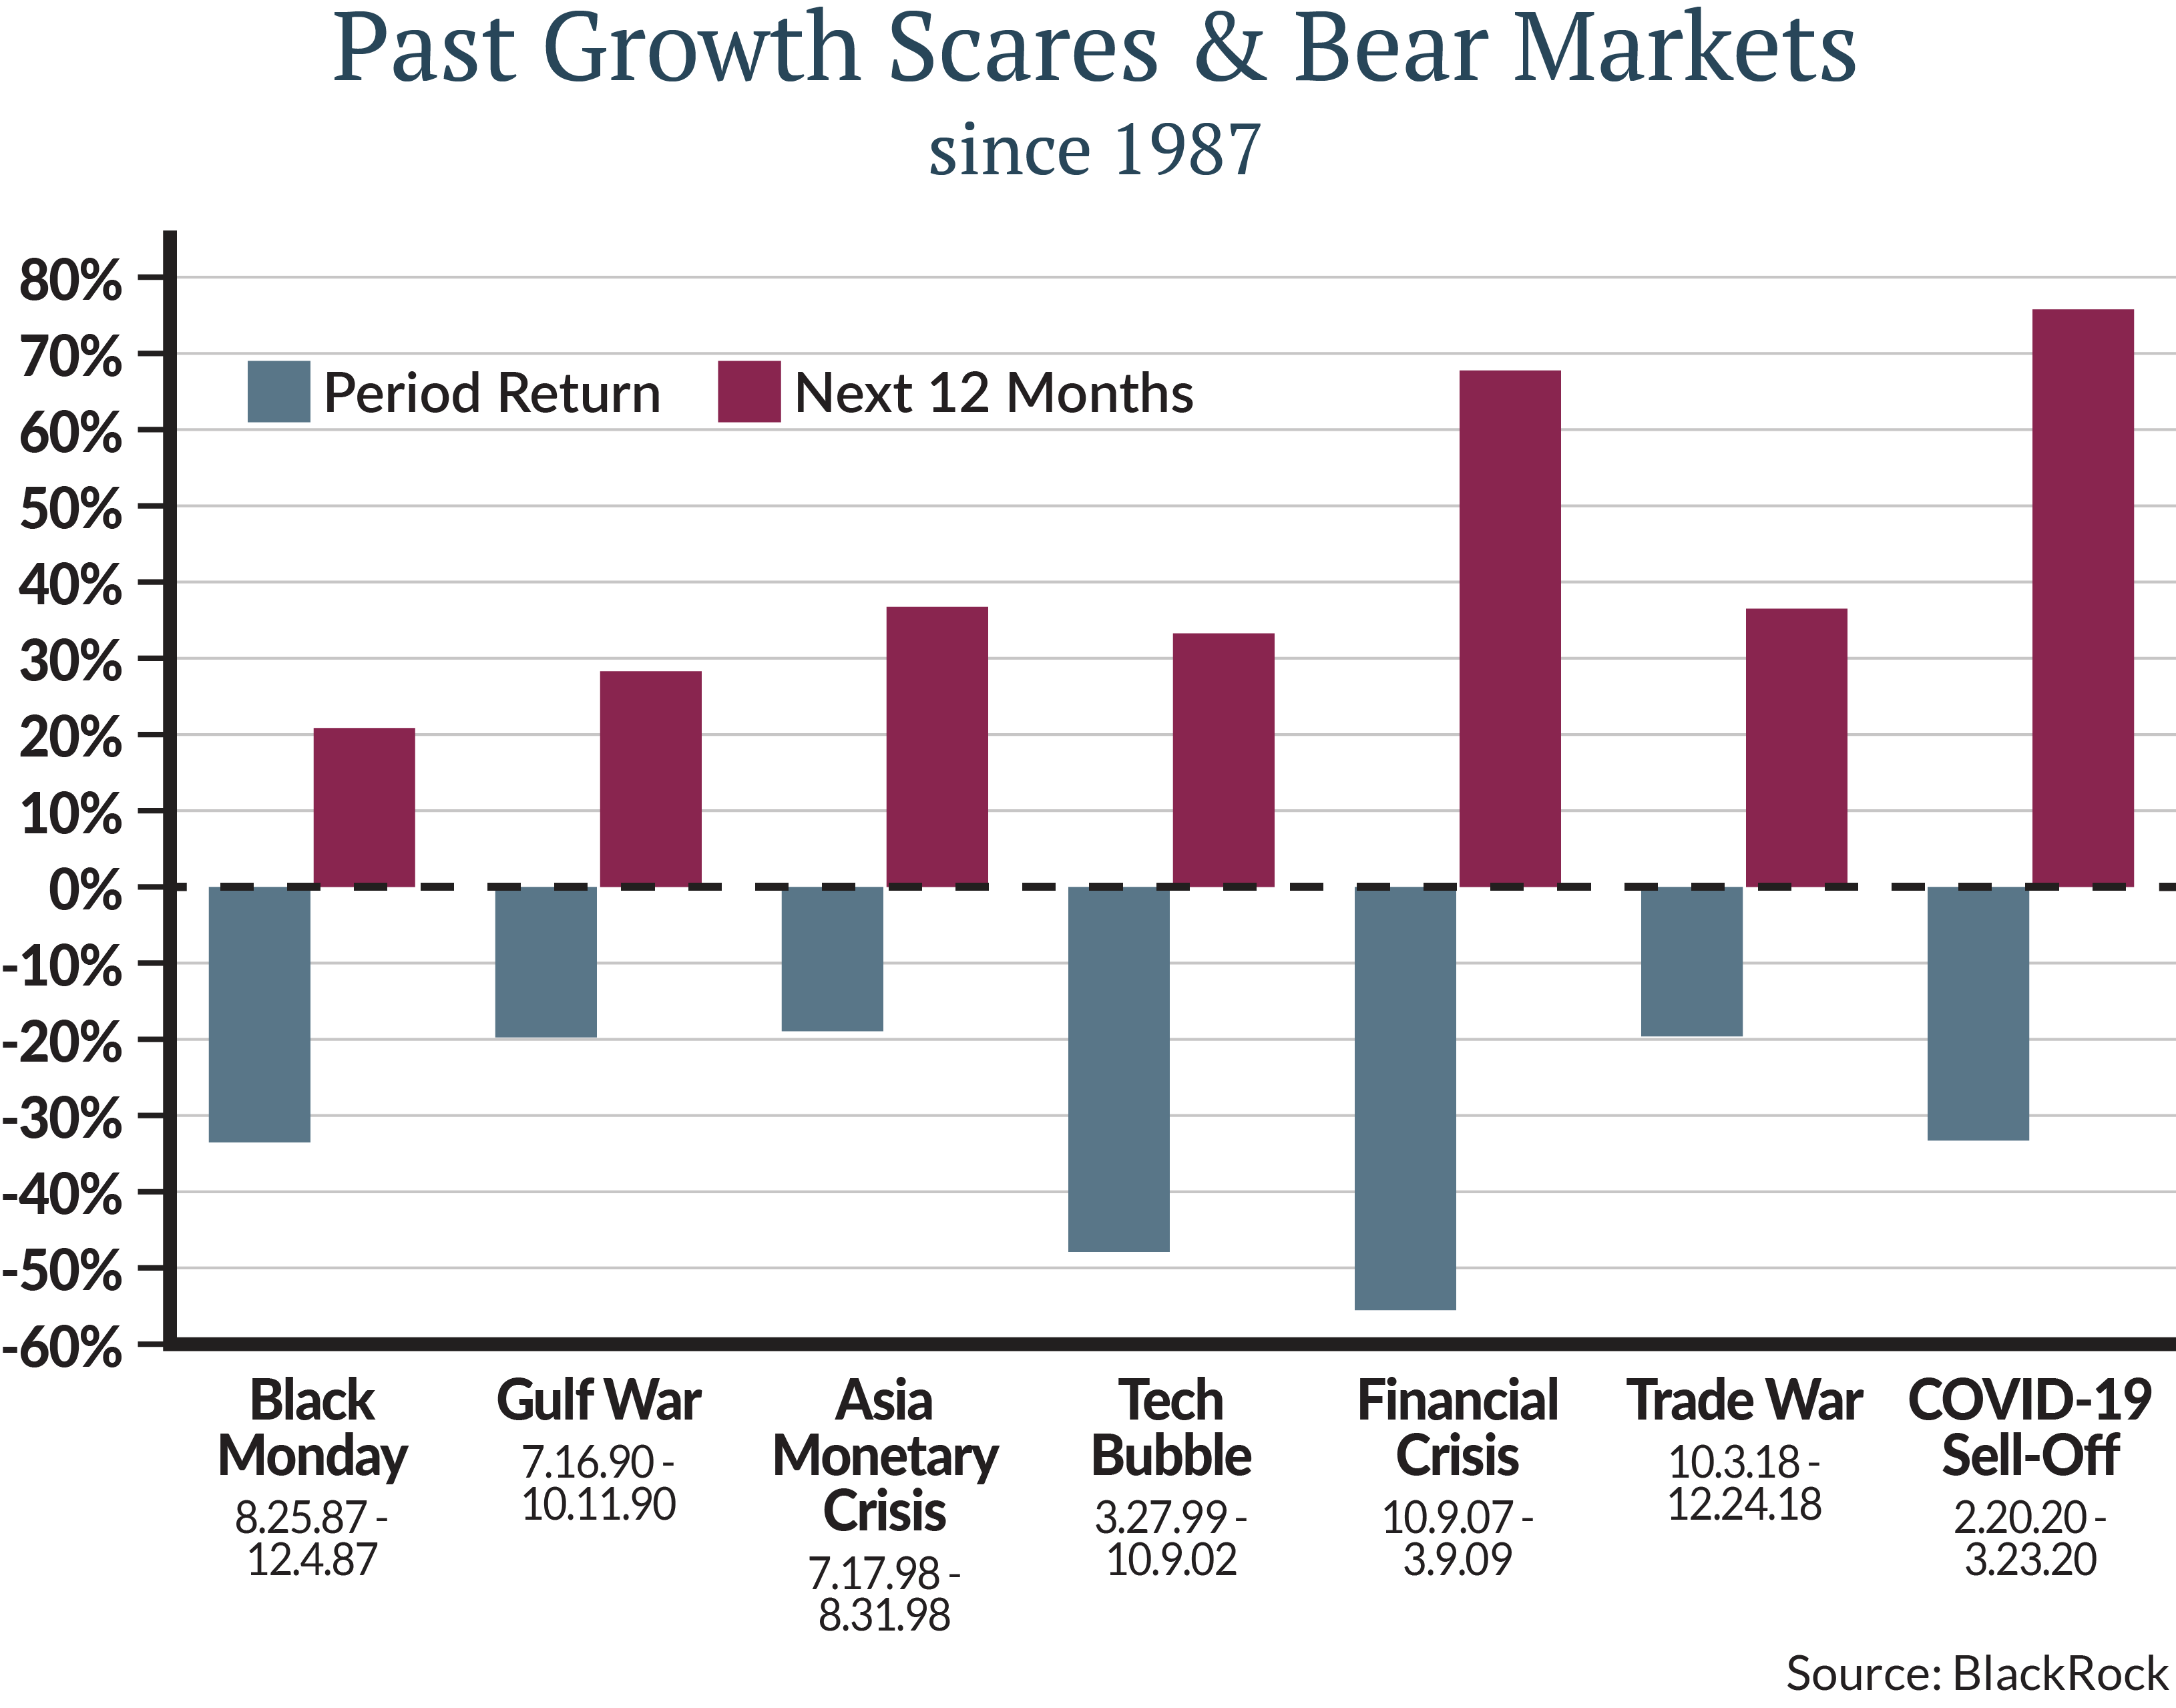 The chart illustrates equity returns, as represented by the S&P 500 Index, during major events and bear markets.